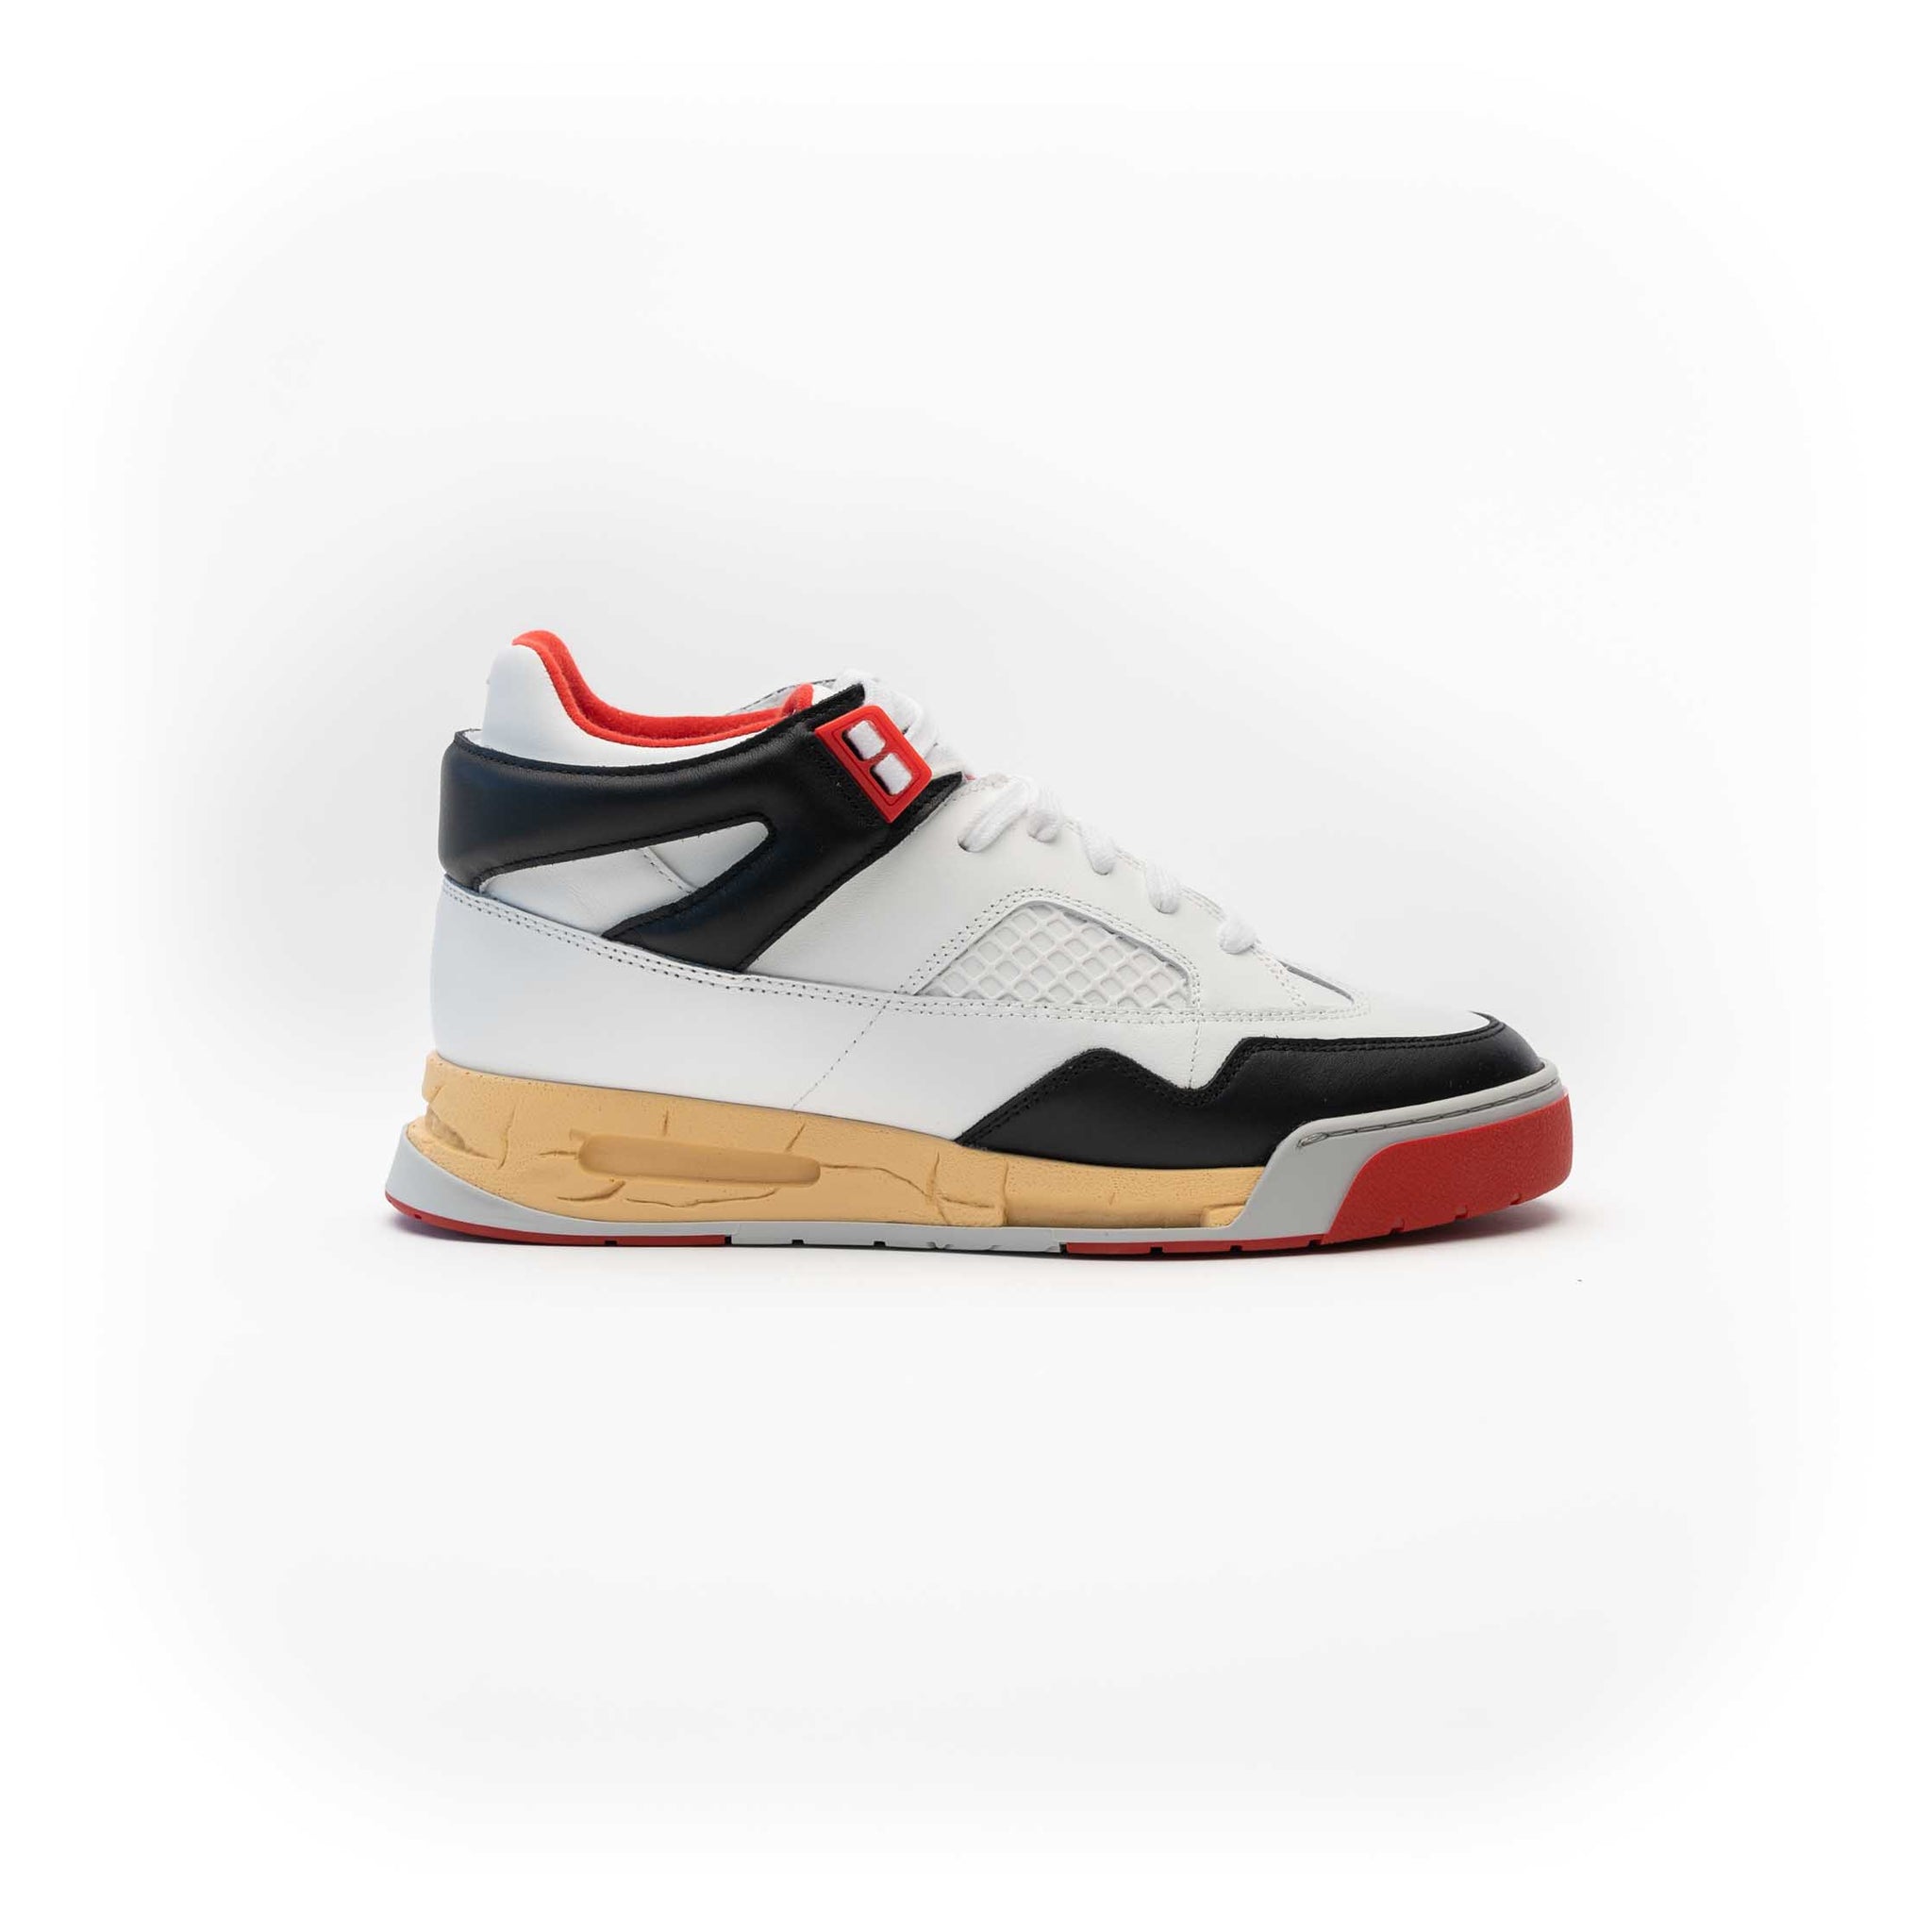 Mid-high paneled buffed leather sneakers in red, white, and black. Round toe. Lace-up closure in white. Logo embossed at padded tongue. Padded collar. Signature white stitch and leather trim in black at heel collar. Textile lining in red. Textured rubber midsole in tan, grey, and red. Treaded rubber outsole in grey and red.